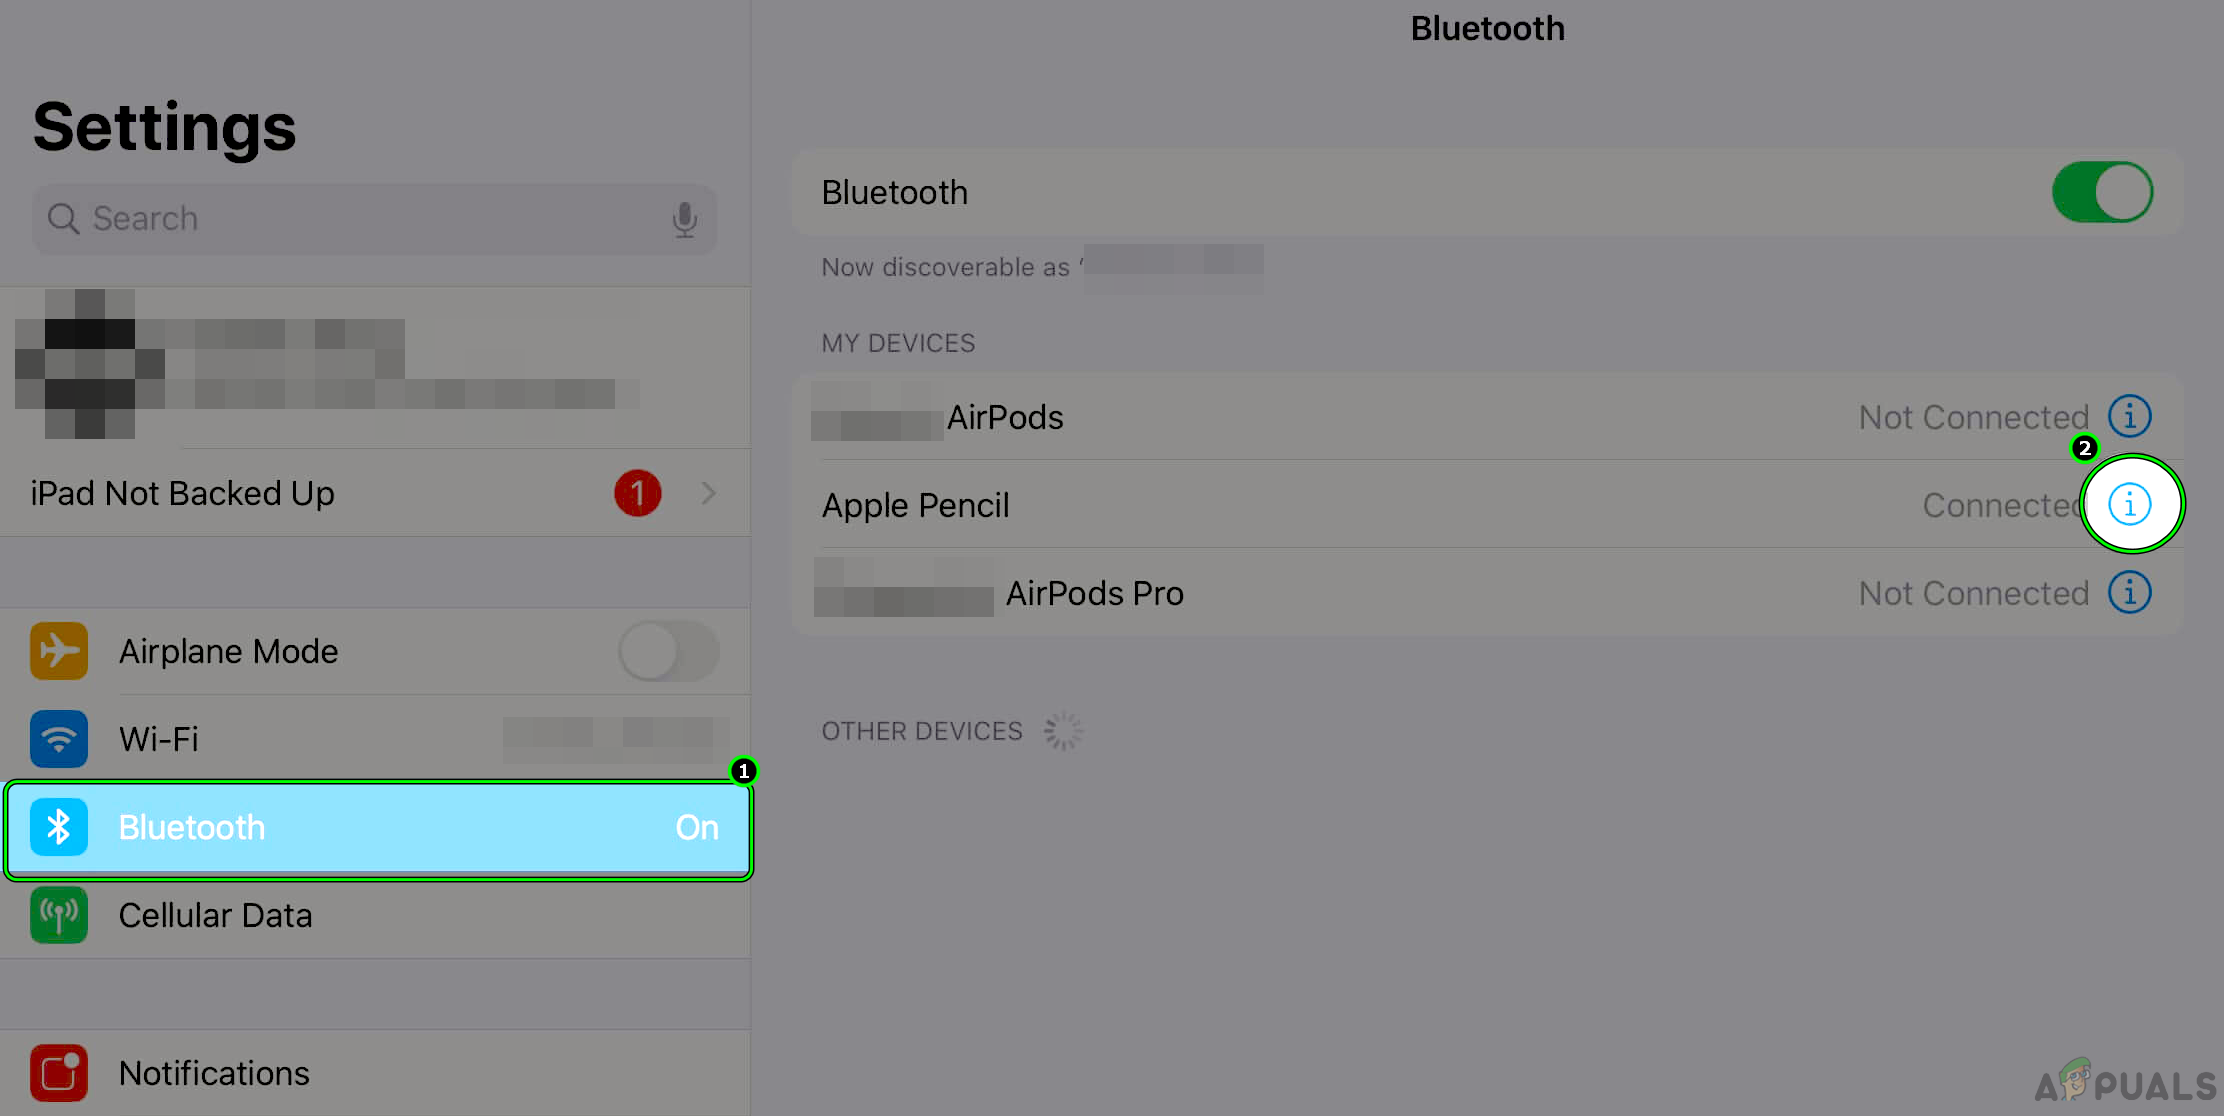 Open the Apple Pencil in the iPad's Bluetooth Settings